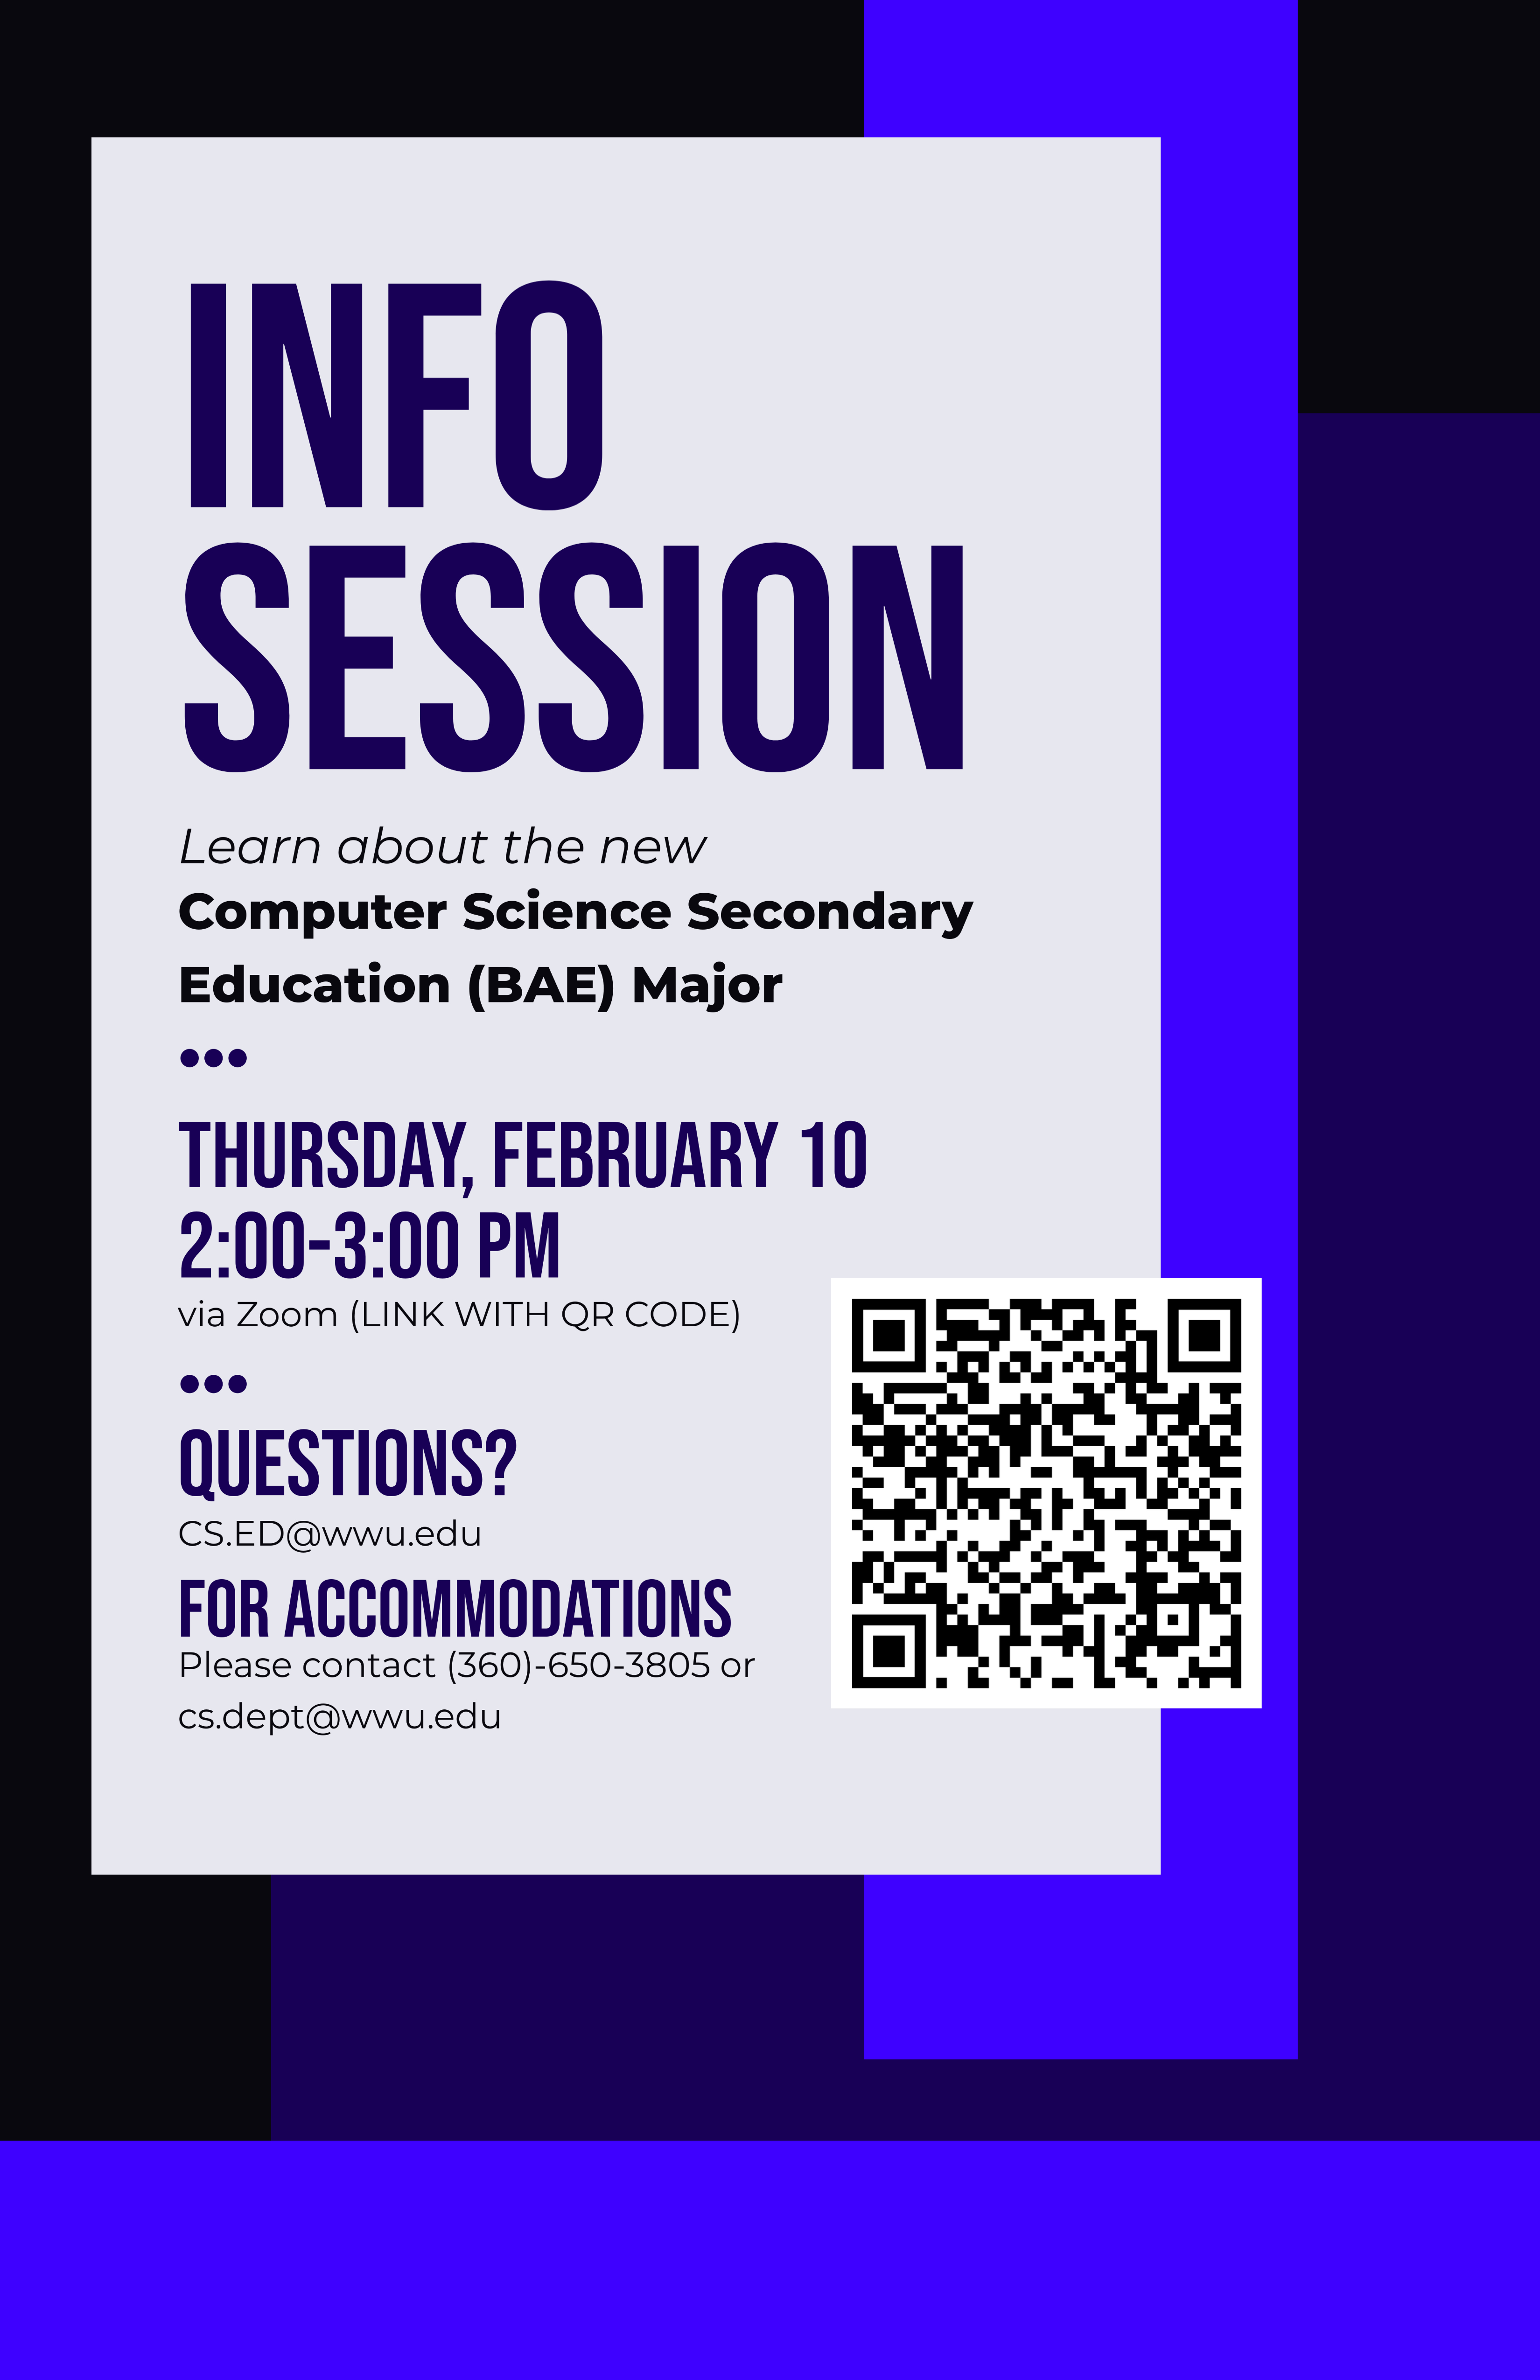 Info Session poster